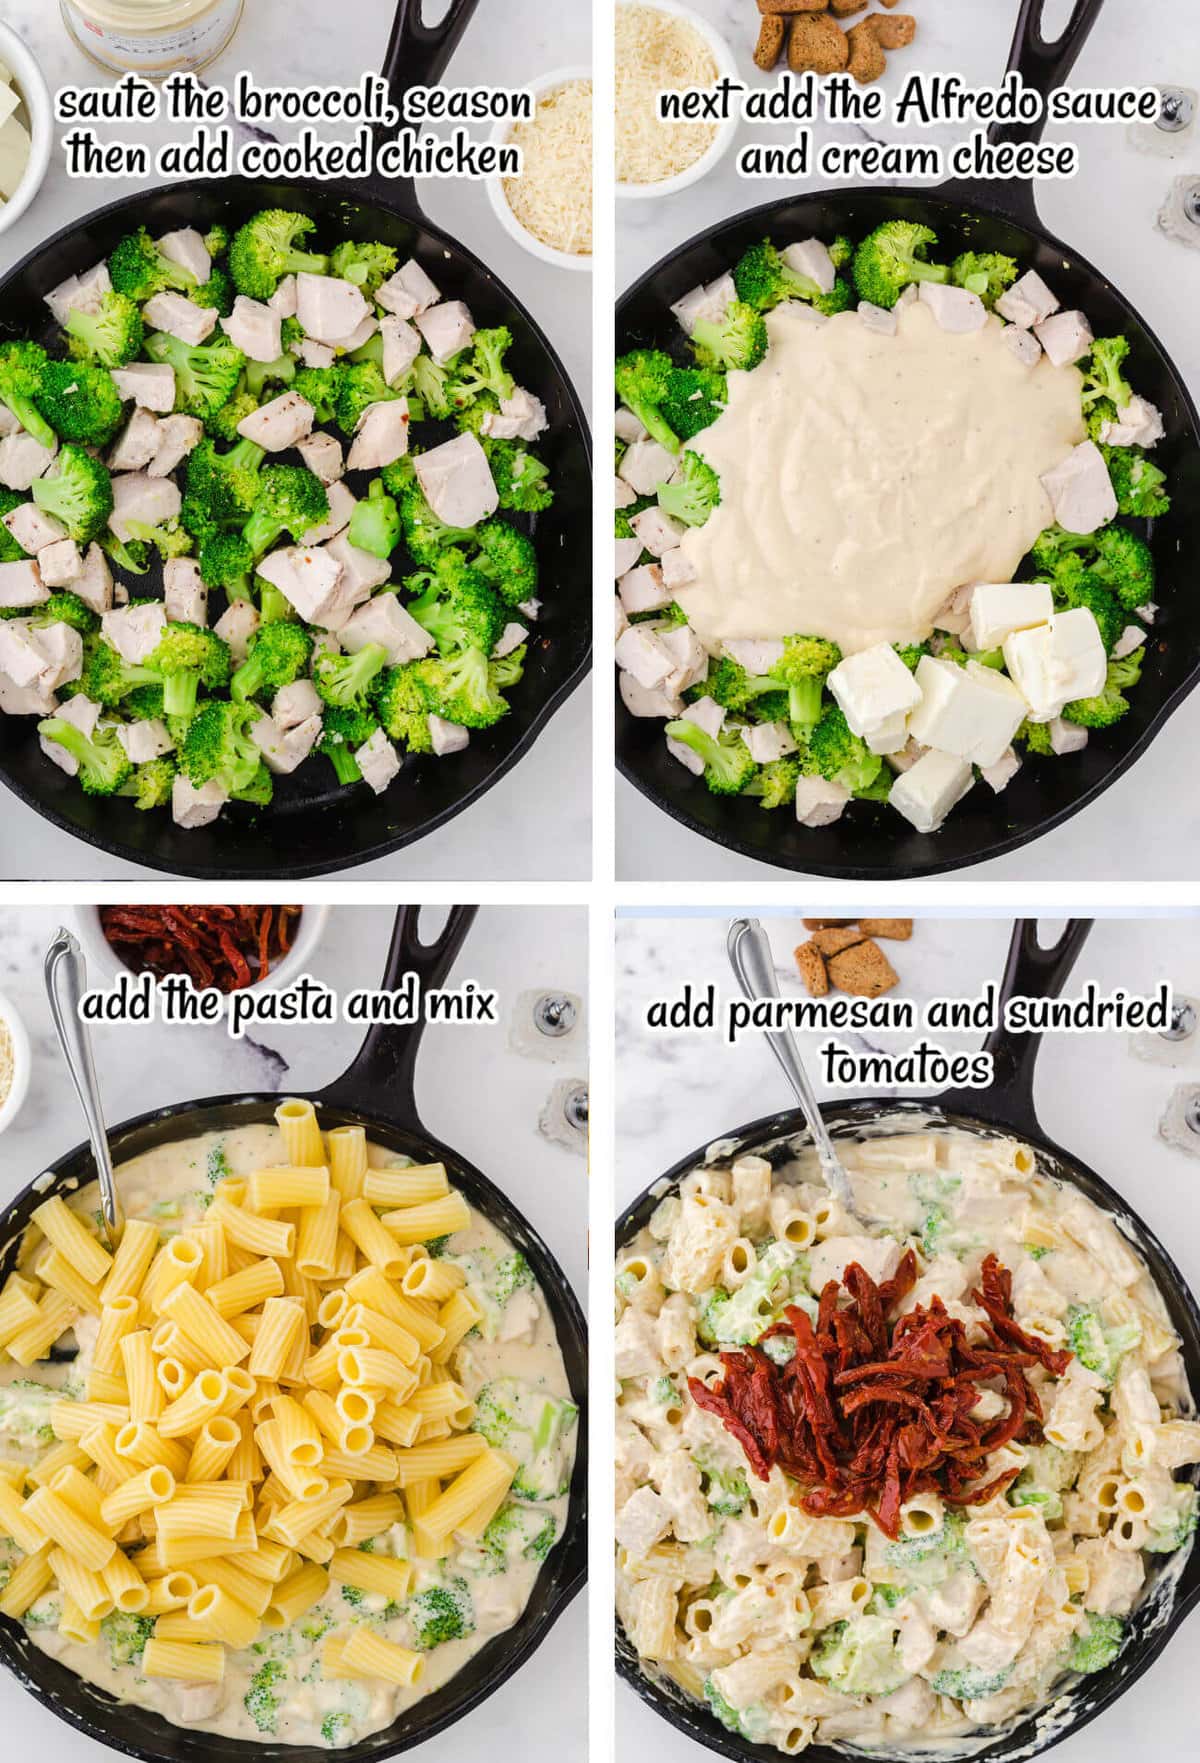 Step by step instruction for the easy chicken broccoli pasta recipe. With print overlay.